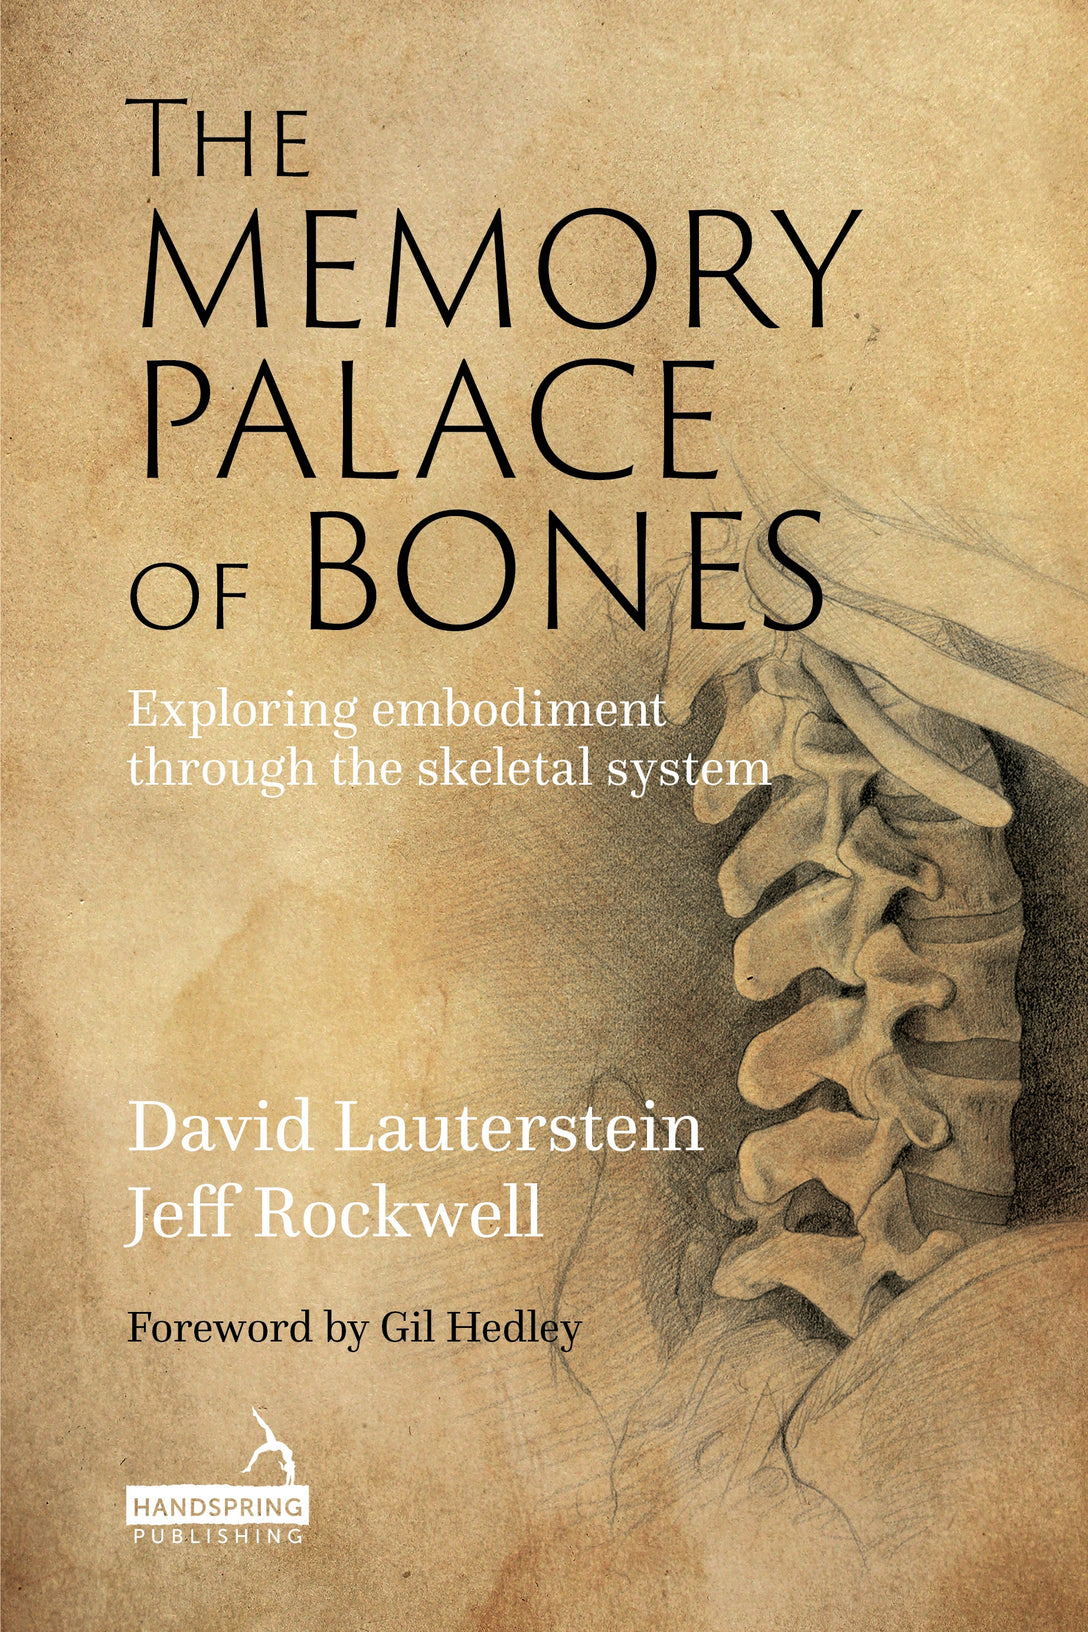 The Memory Palace of Bones by Jeff Rockwell, David Lauterstein